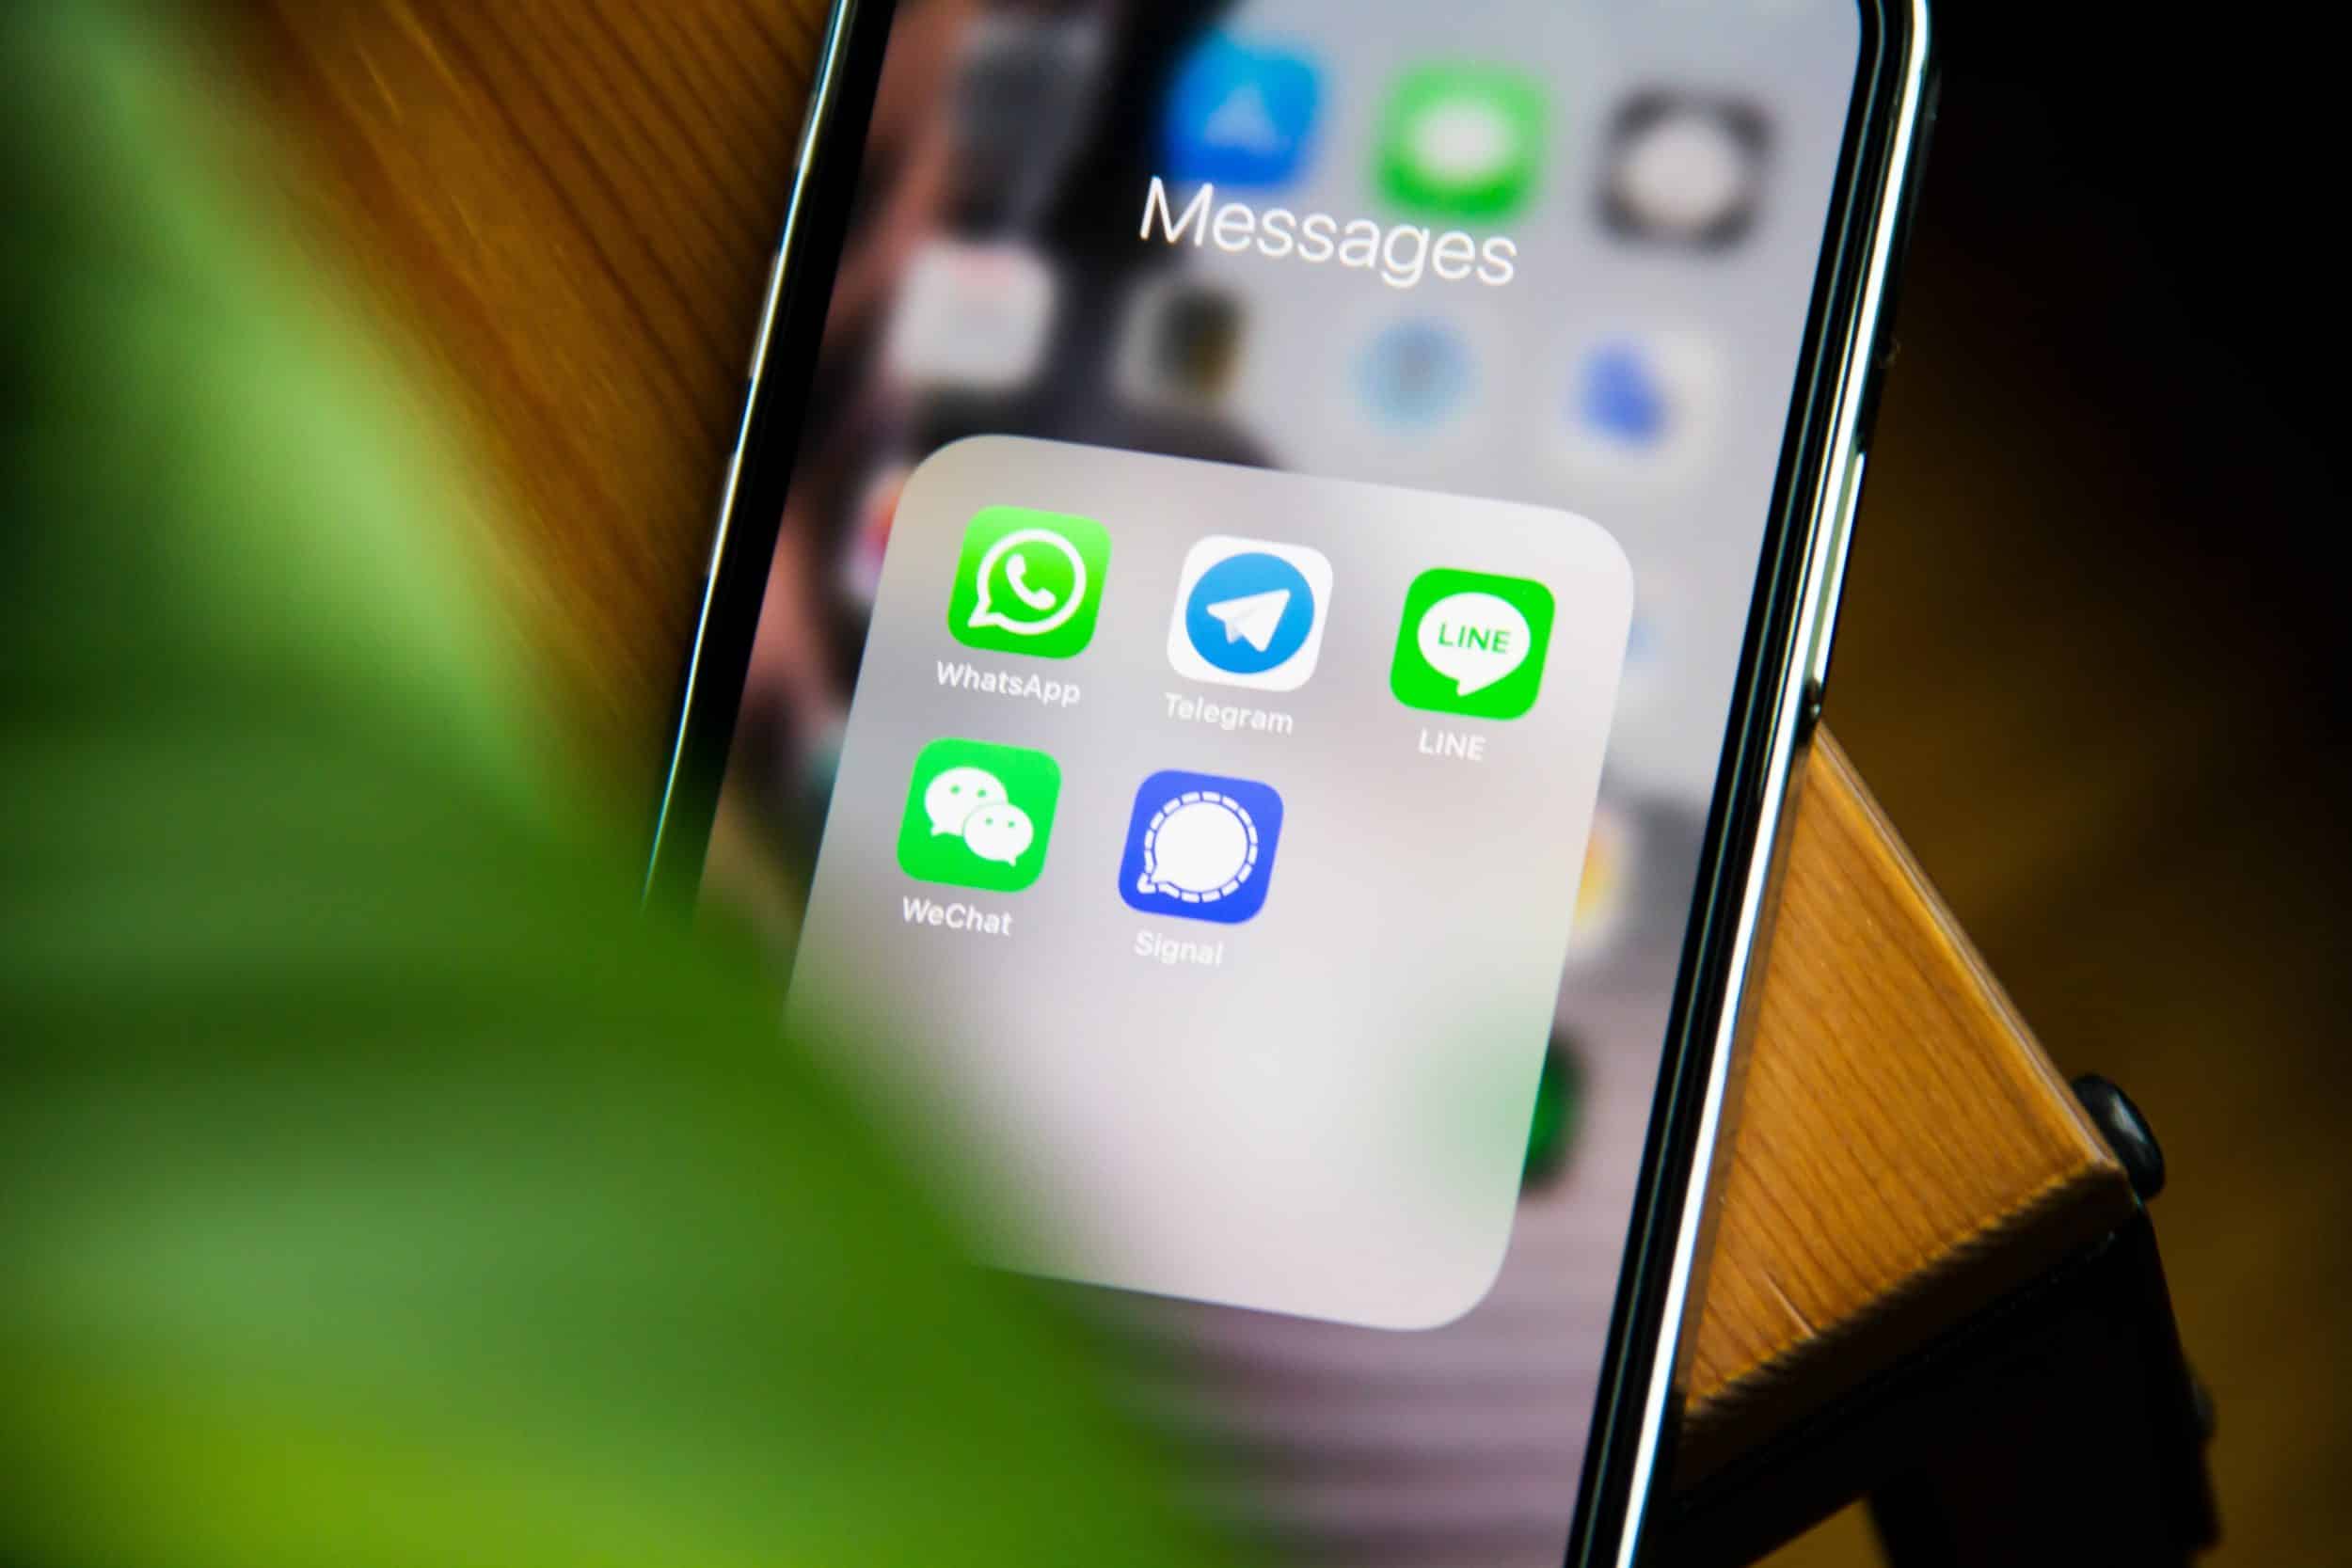 Close up of iphone with messaging apps open